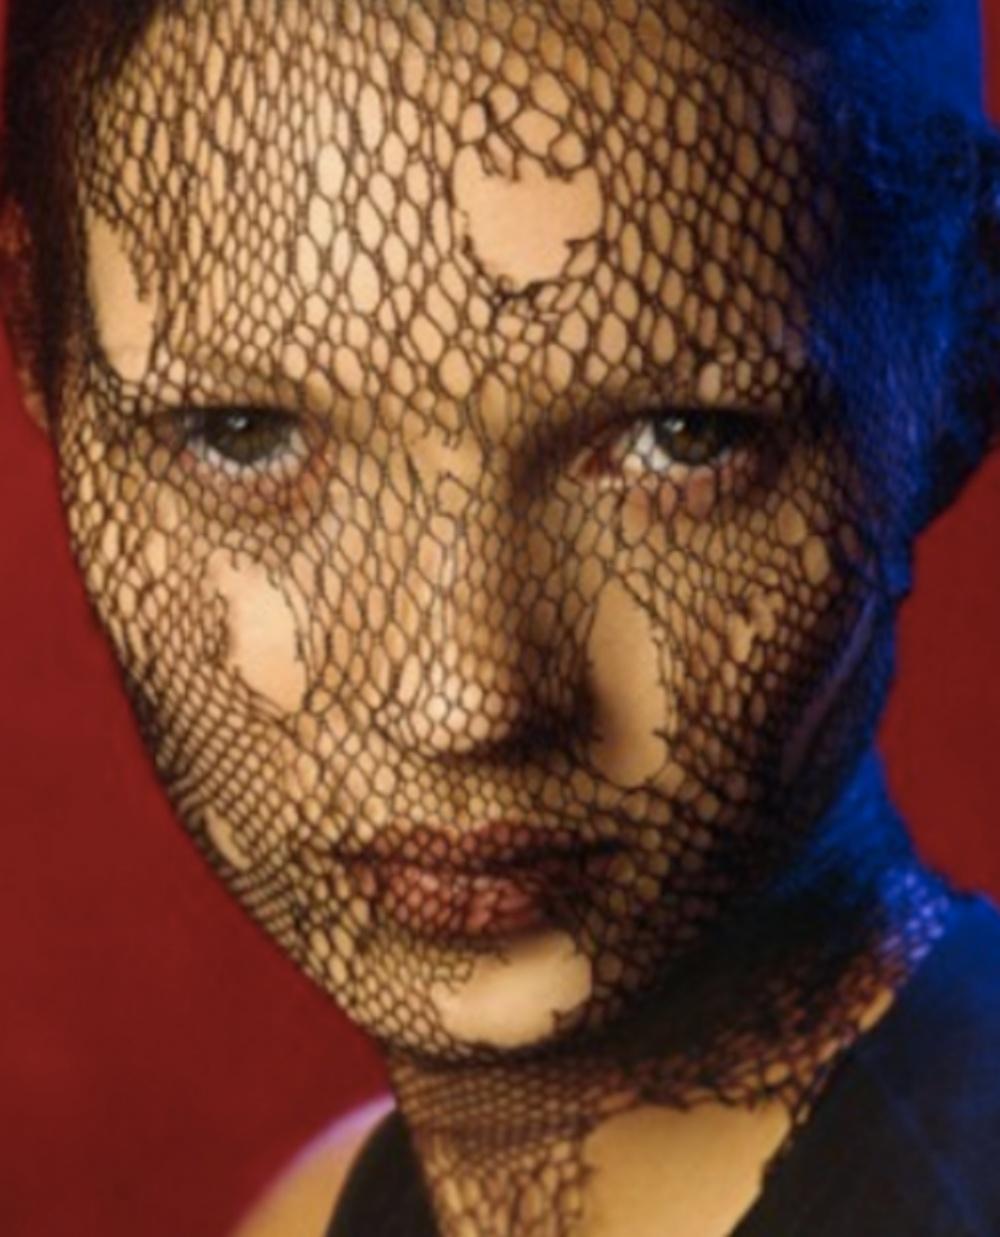 ALBERT WATSON (*1942, Scotland)
Kate Moss Veil (color), 1993
Special Carbon Series on lithographic paper
image 76 x 56 cm (29 7/8 x 22 in.) 
Edition of 7, plus 2 AP; Ed. no. 3/7
Print only

Albert Watson was born 1942 in Edinburgh, Scotland.

He